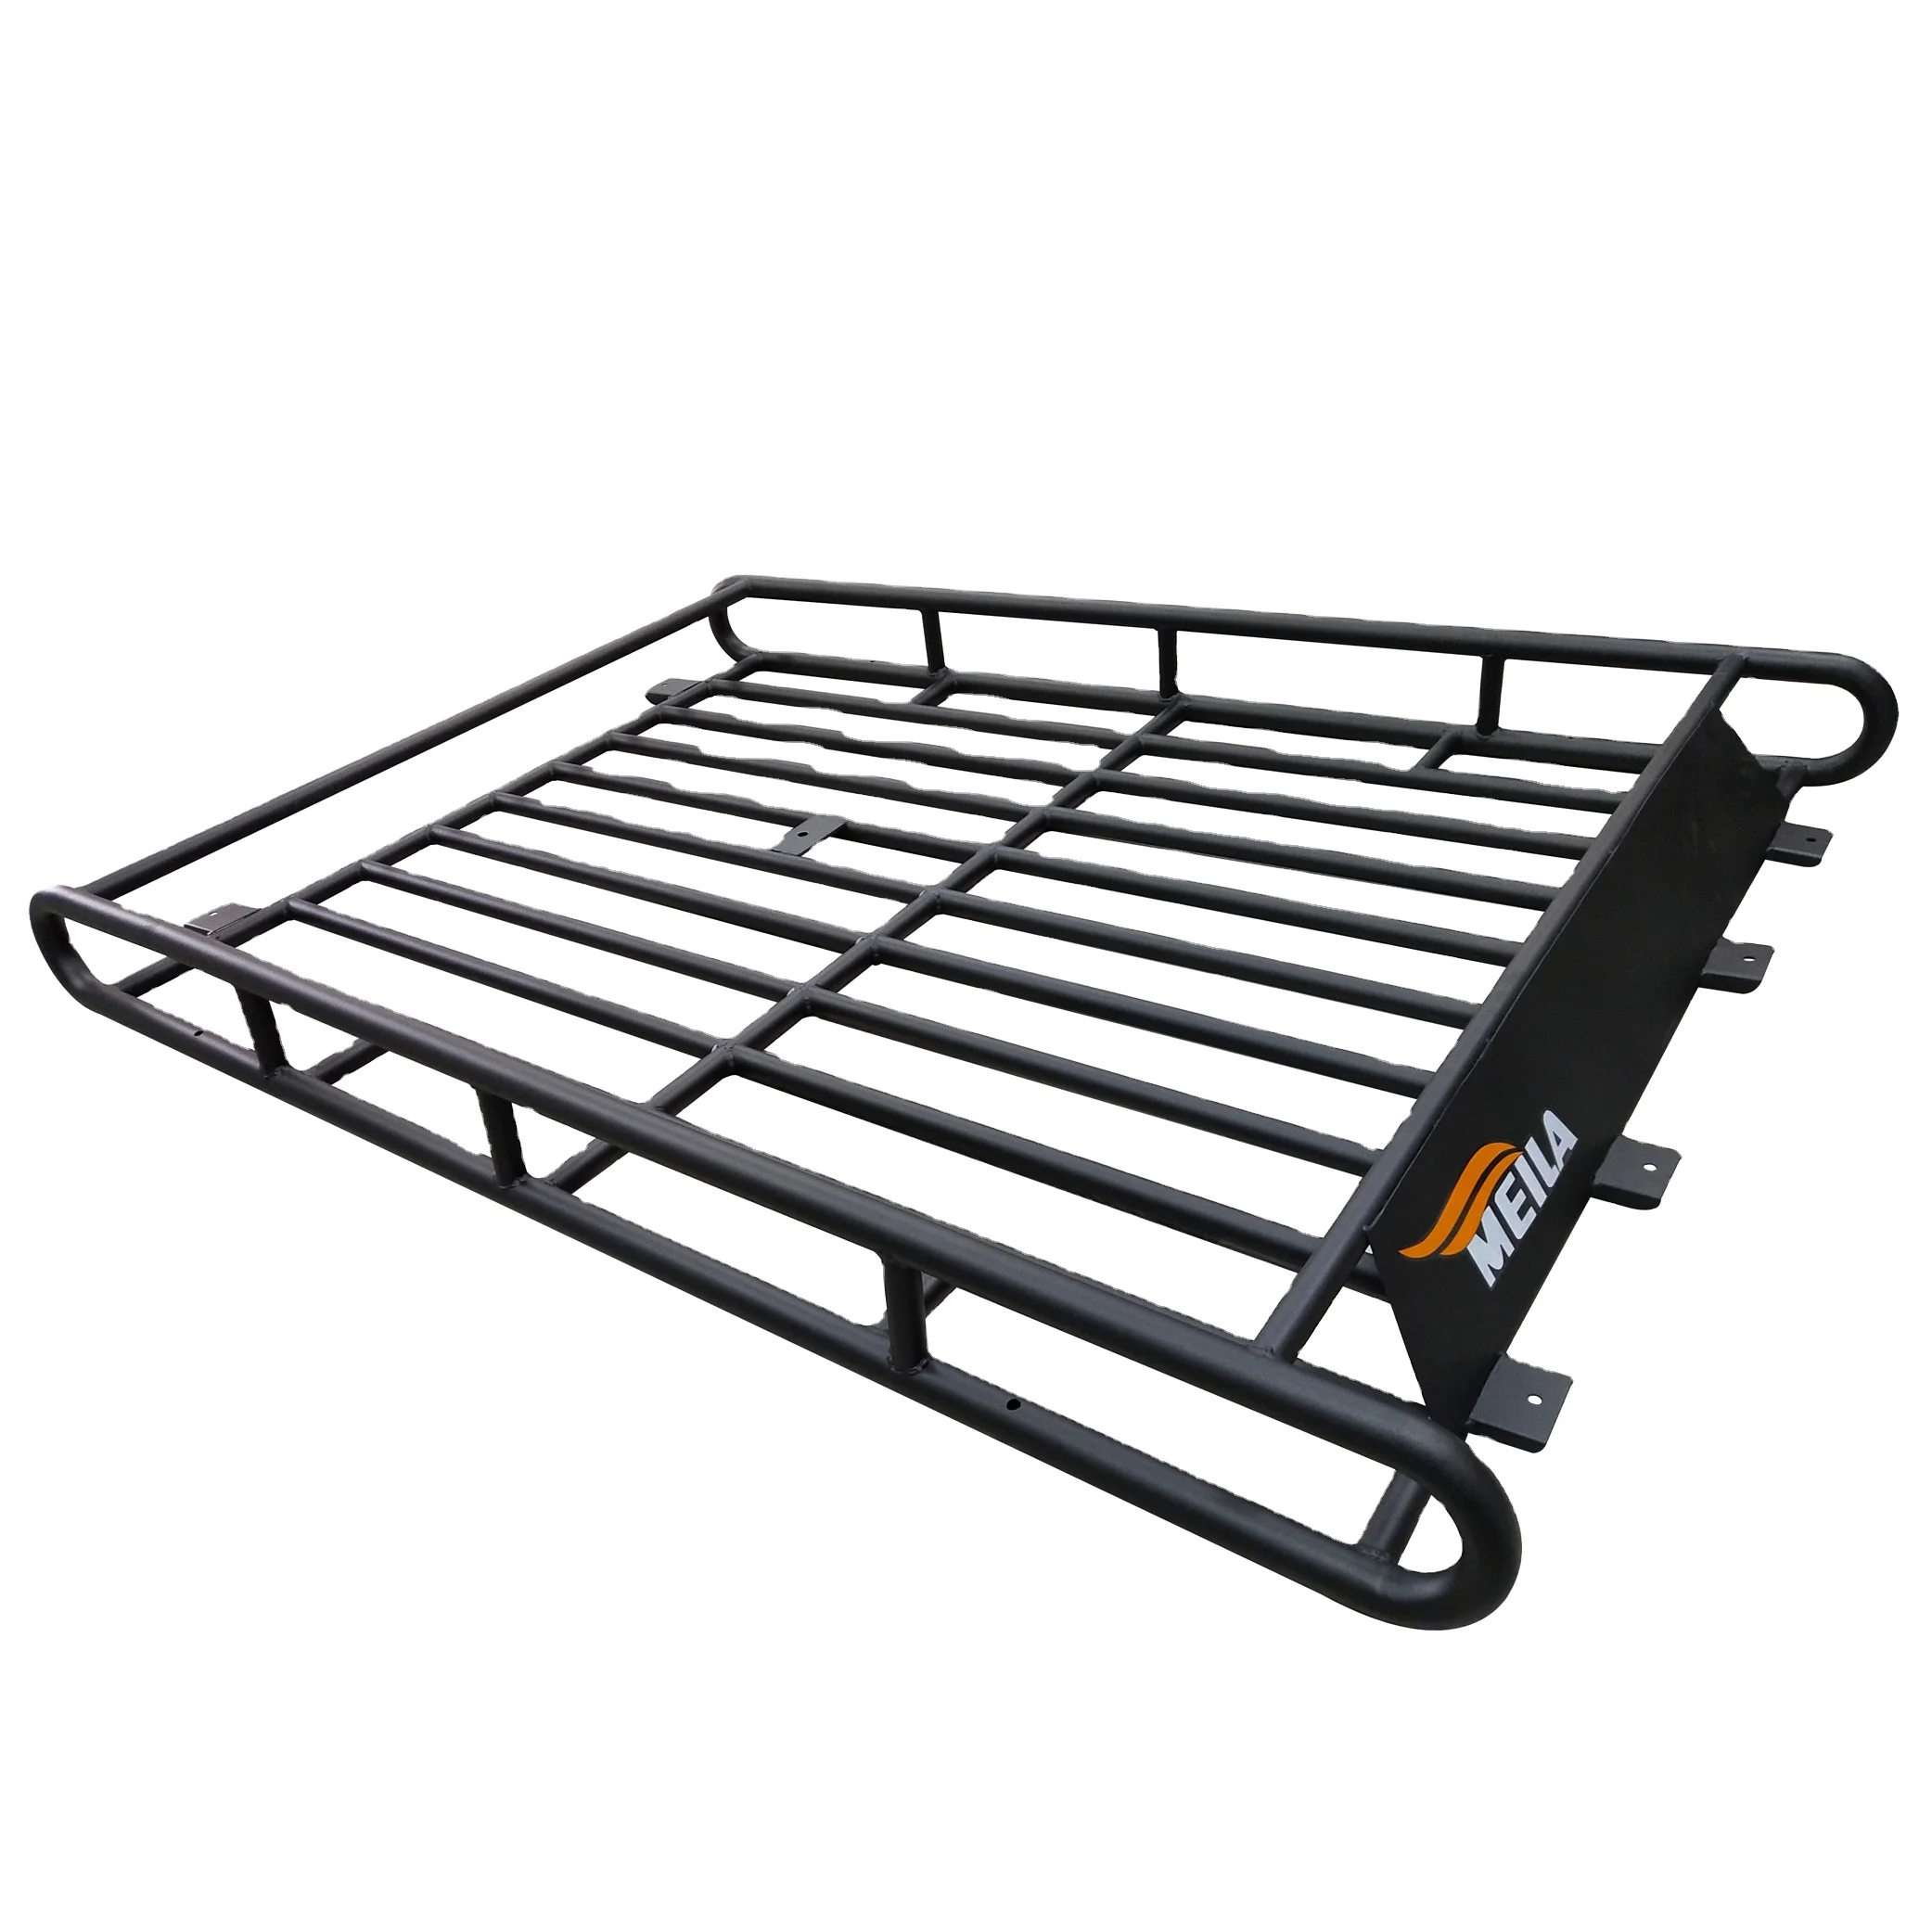 

YH-E-010-A High quality iron steel roof rack luggage rack carrier basket roof basket for Land Rover Discovery 4